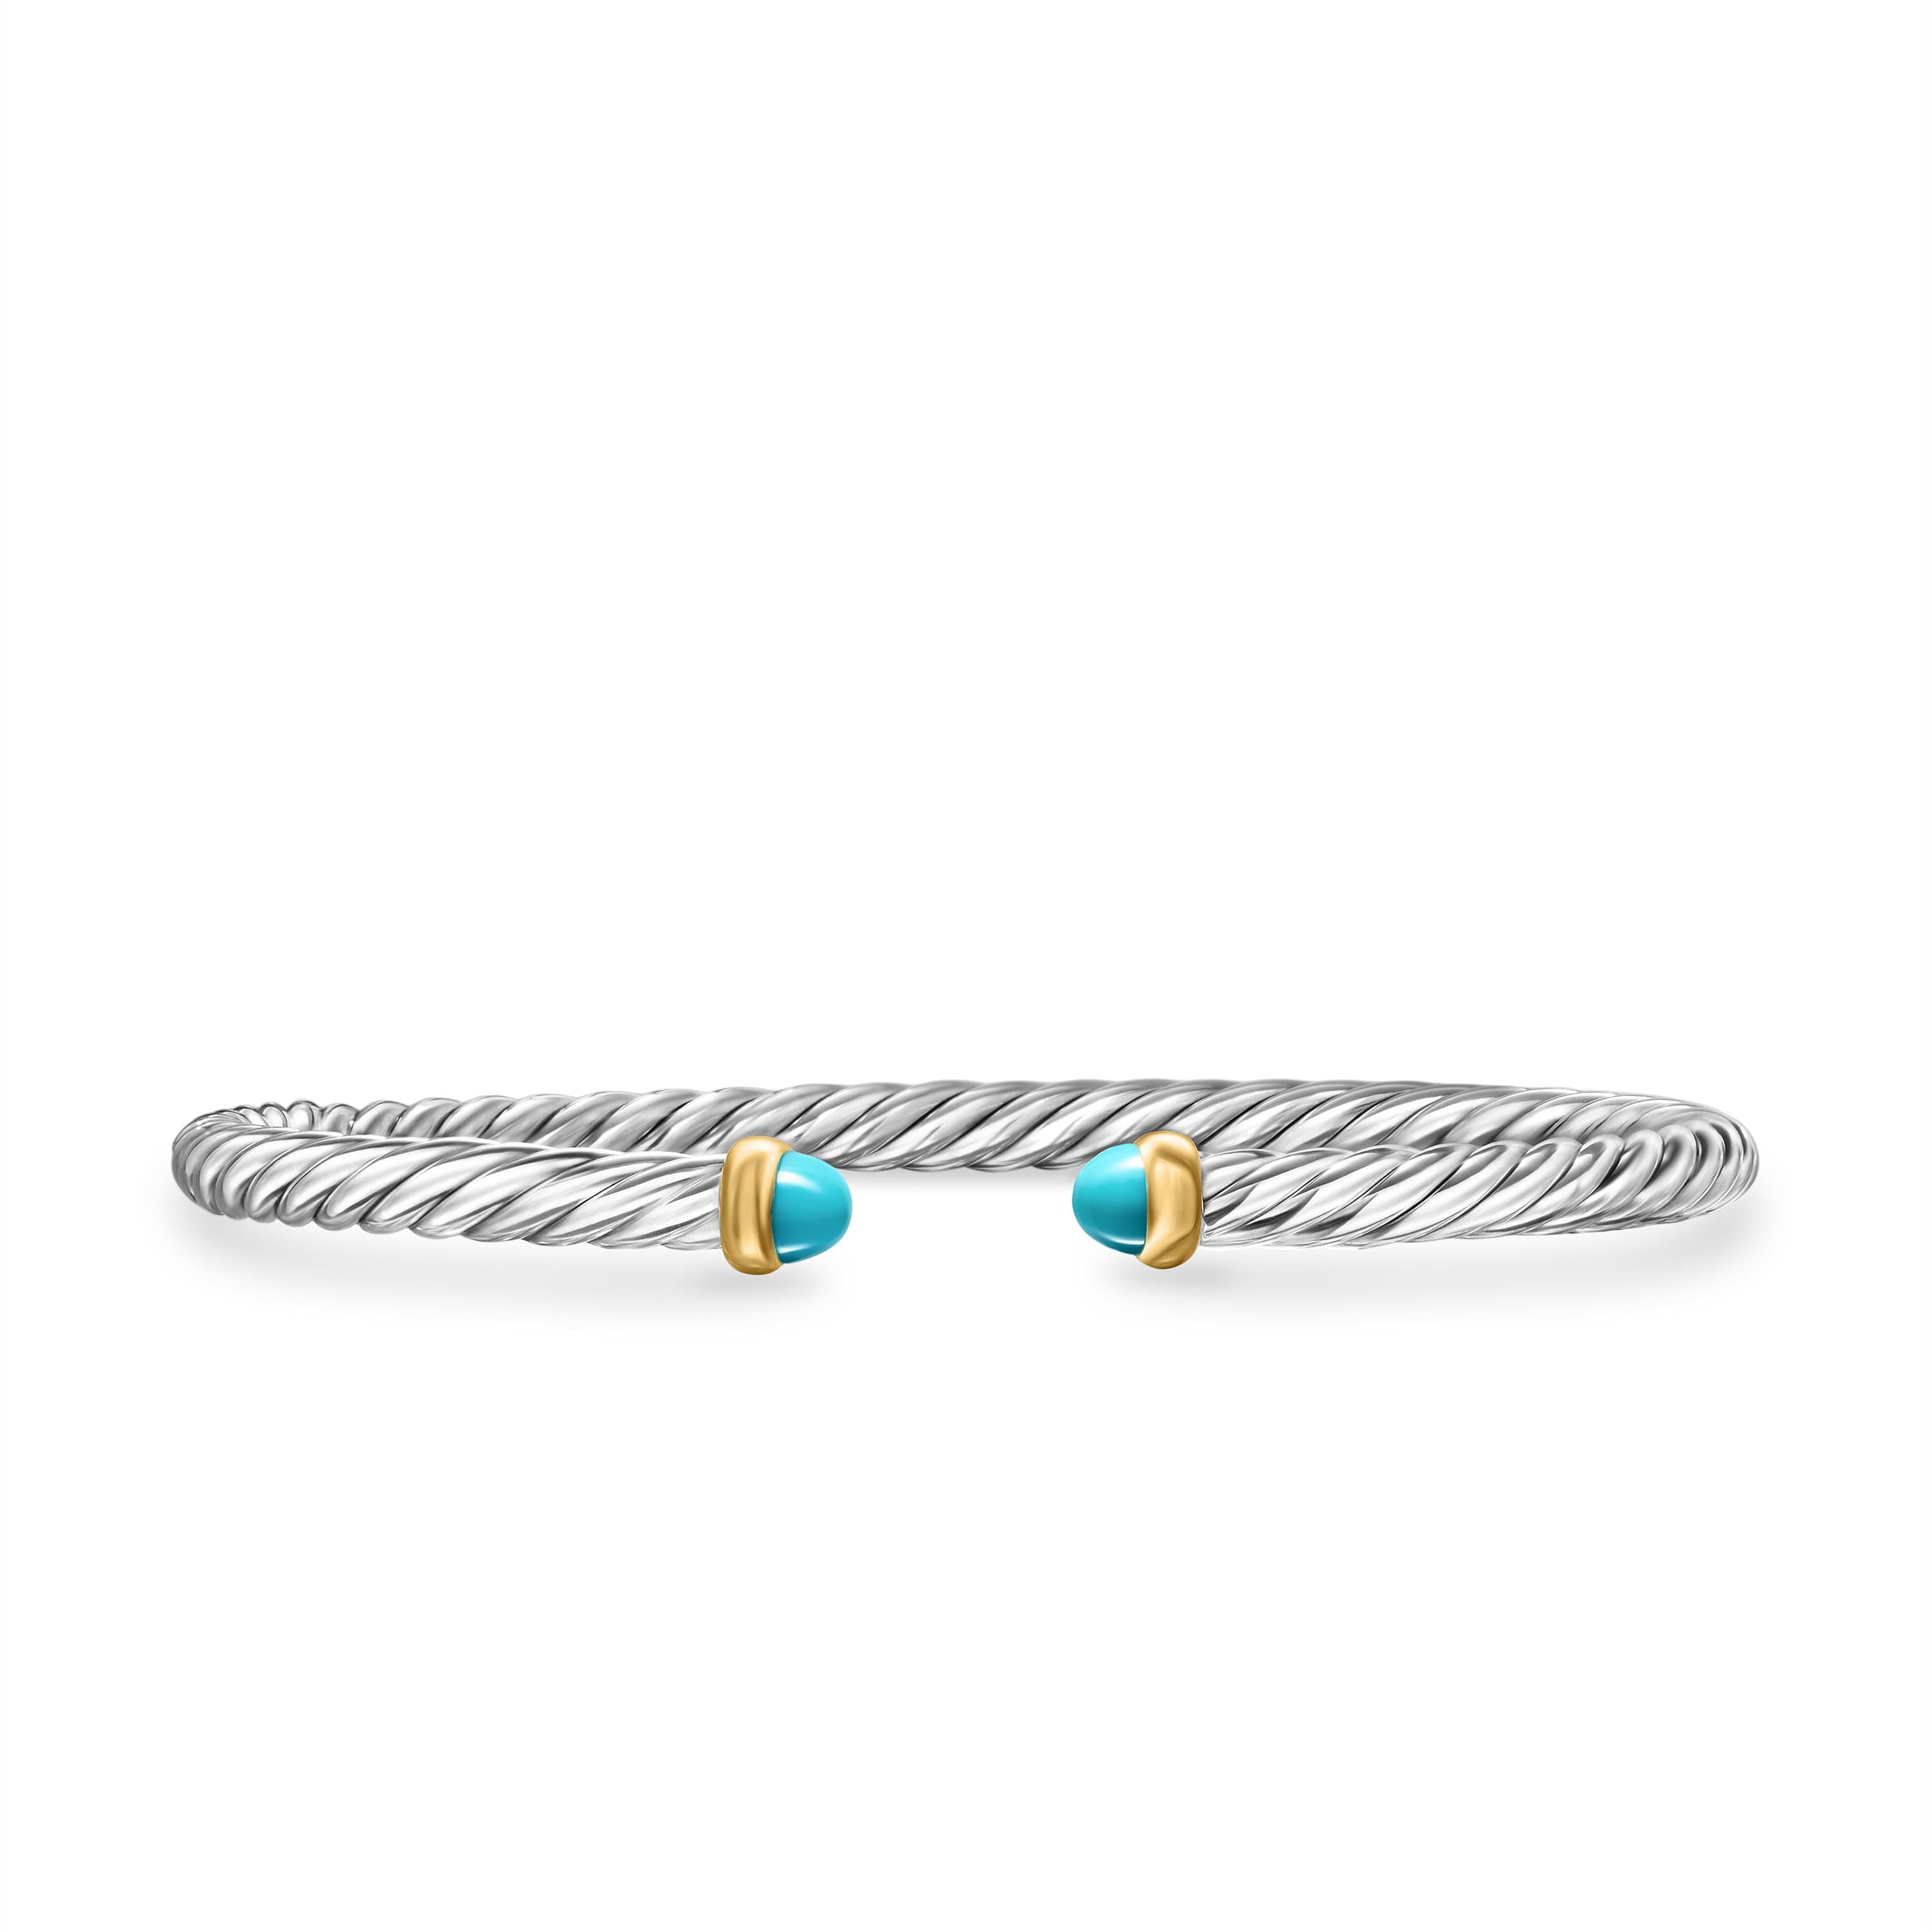 David Yurman Cable Flex Sterling Silver Bracelet with Turquoise, Size Medium 0